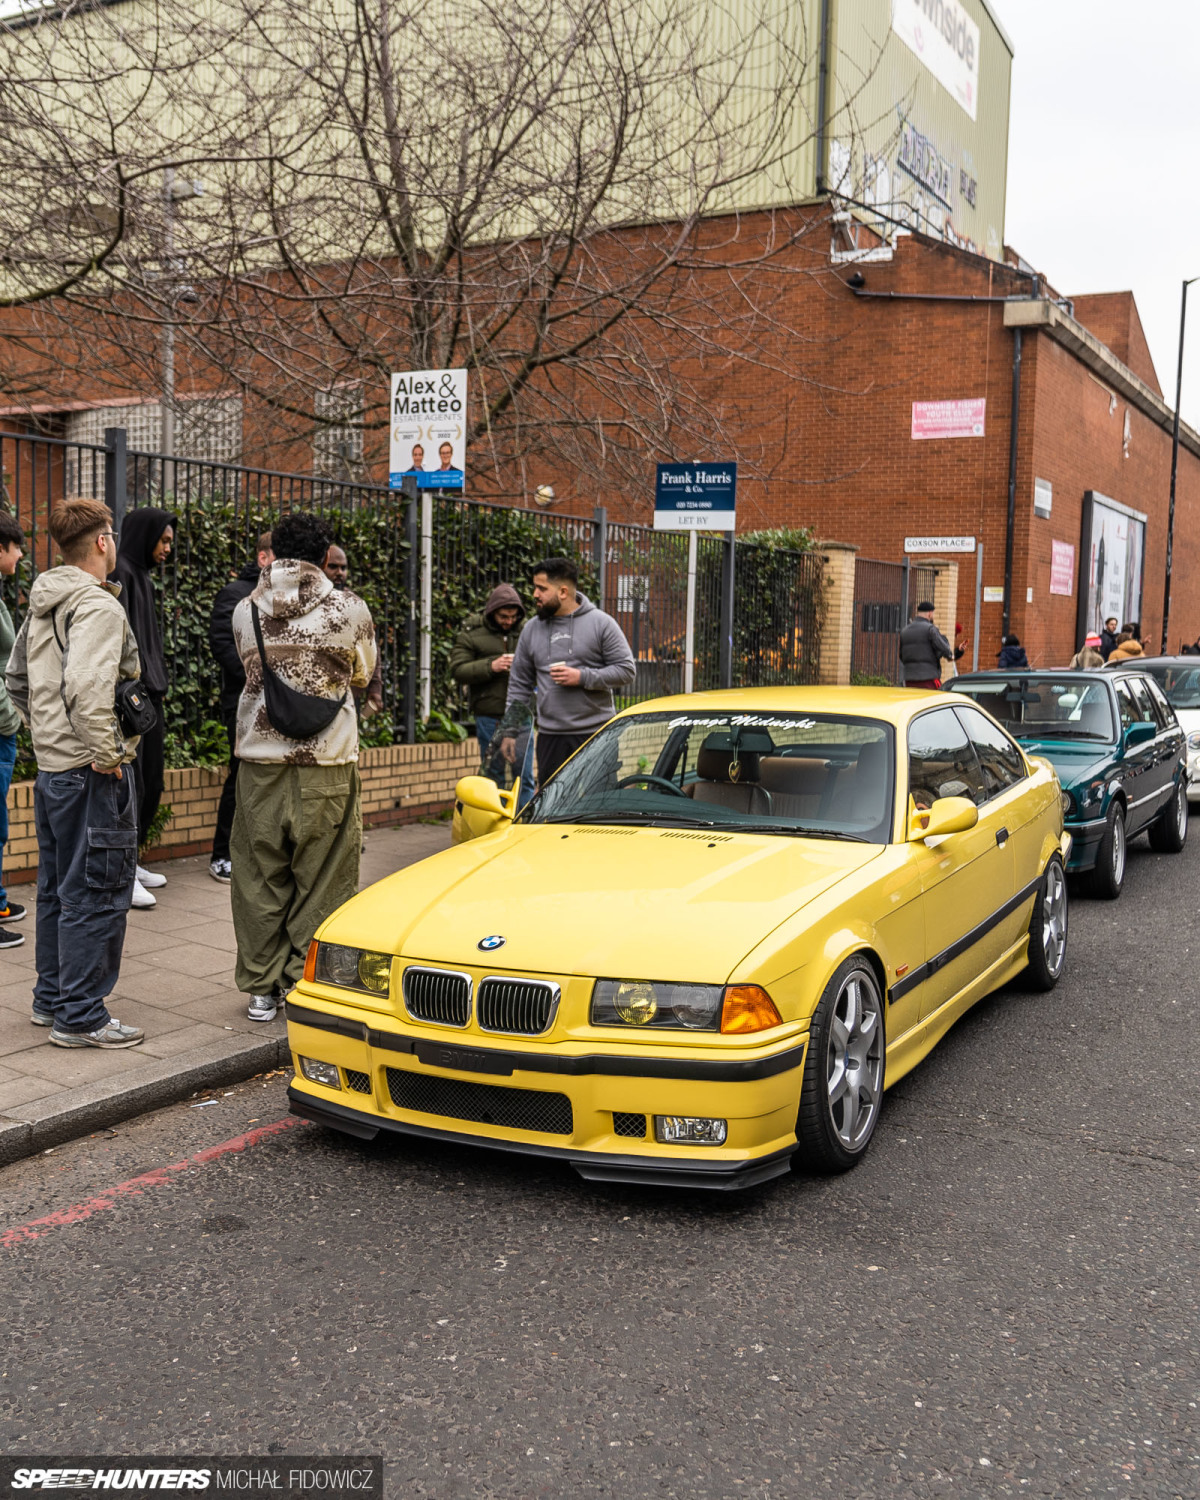 ulez, of, mildly, micol, london, interesting, good, forevergood, forever, coffee, cars, car culture, and, curating london’s car culture with a micol morning